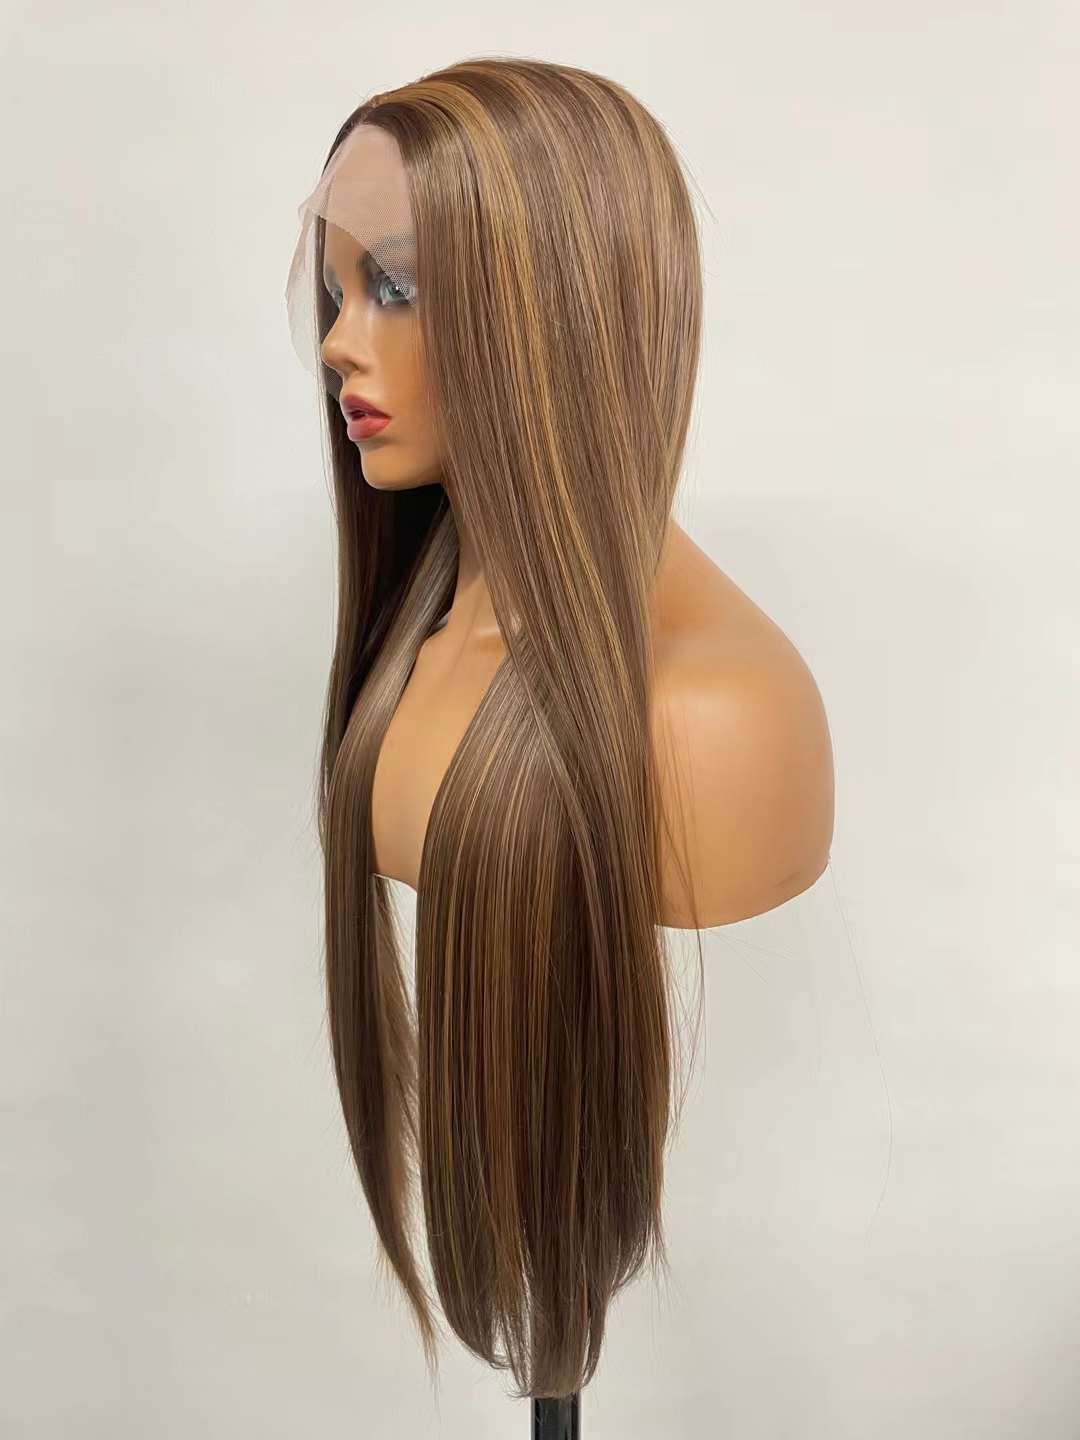 Flawless Piano color Long straight hair lace frontal Wig